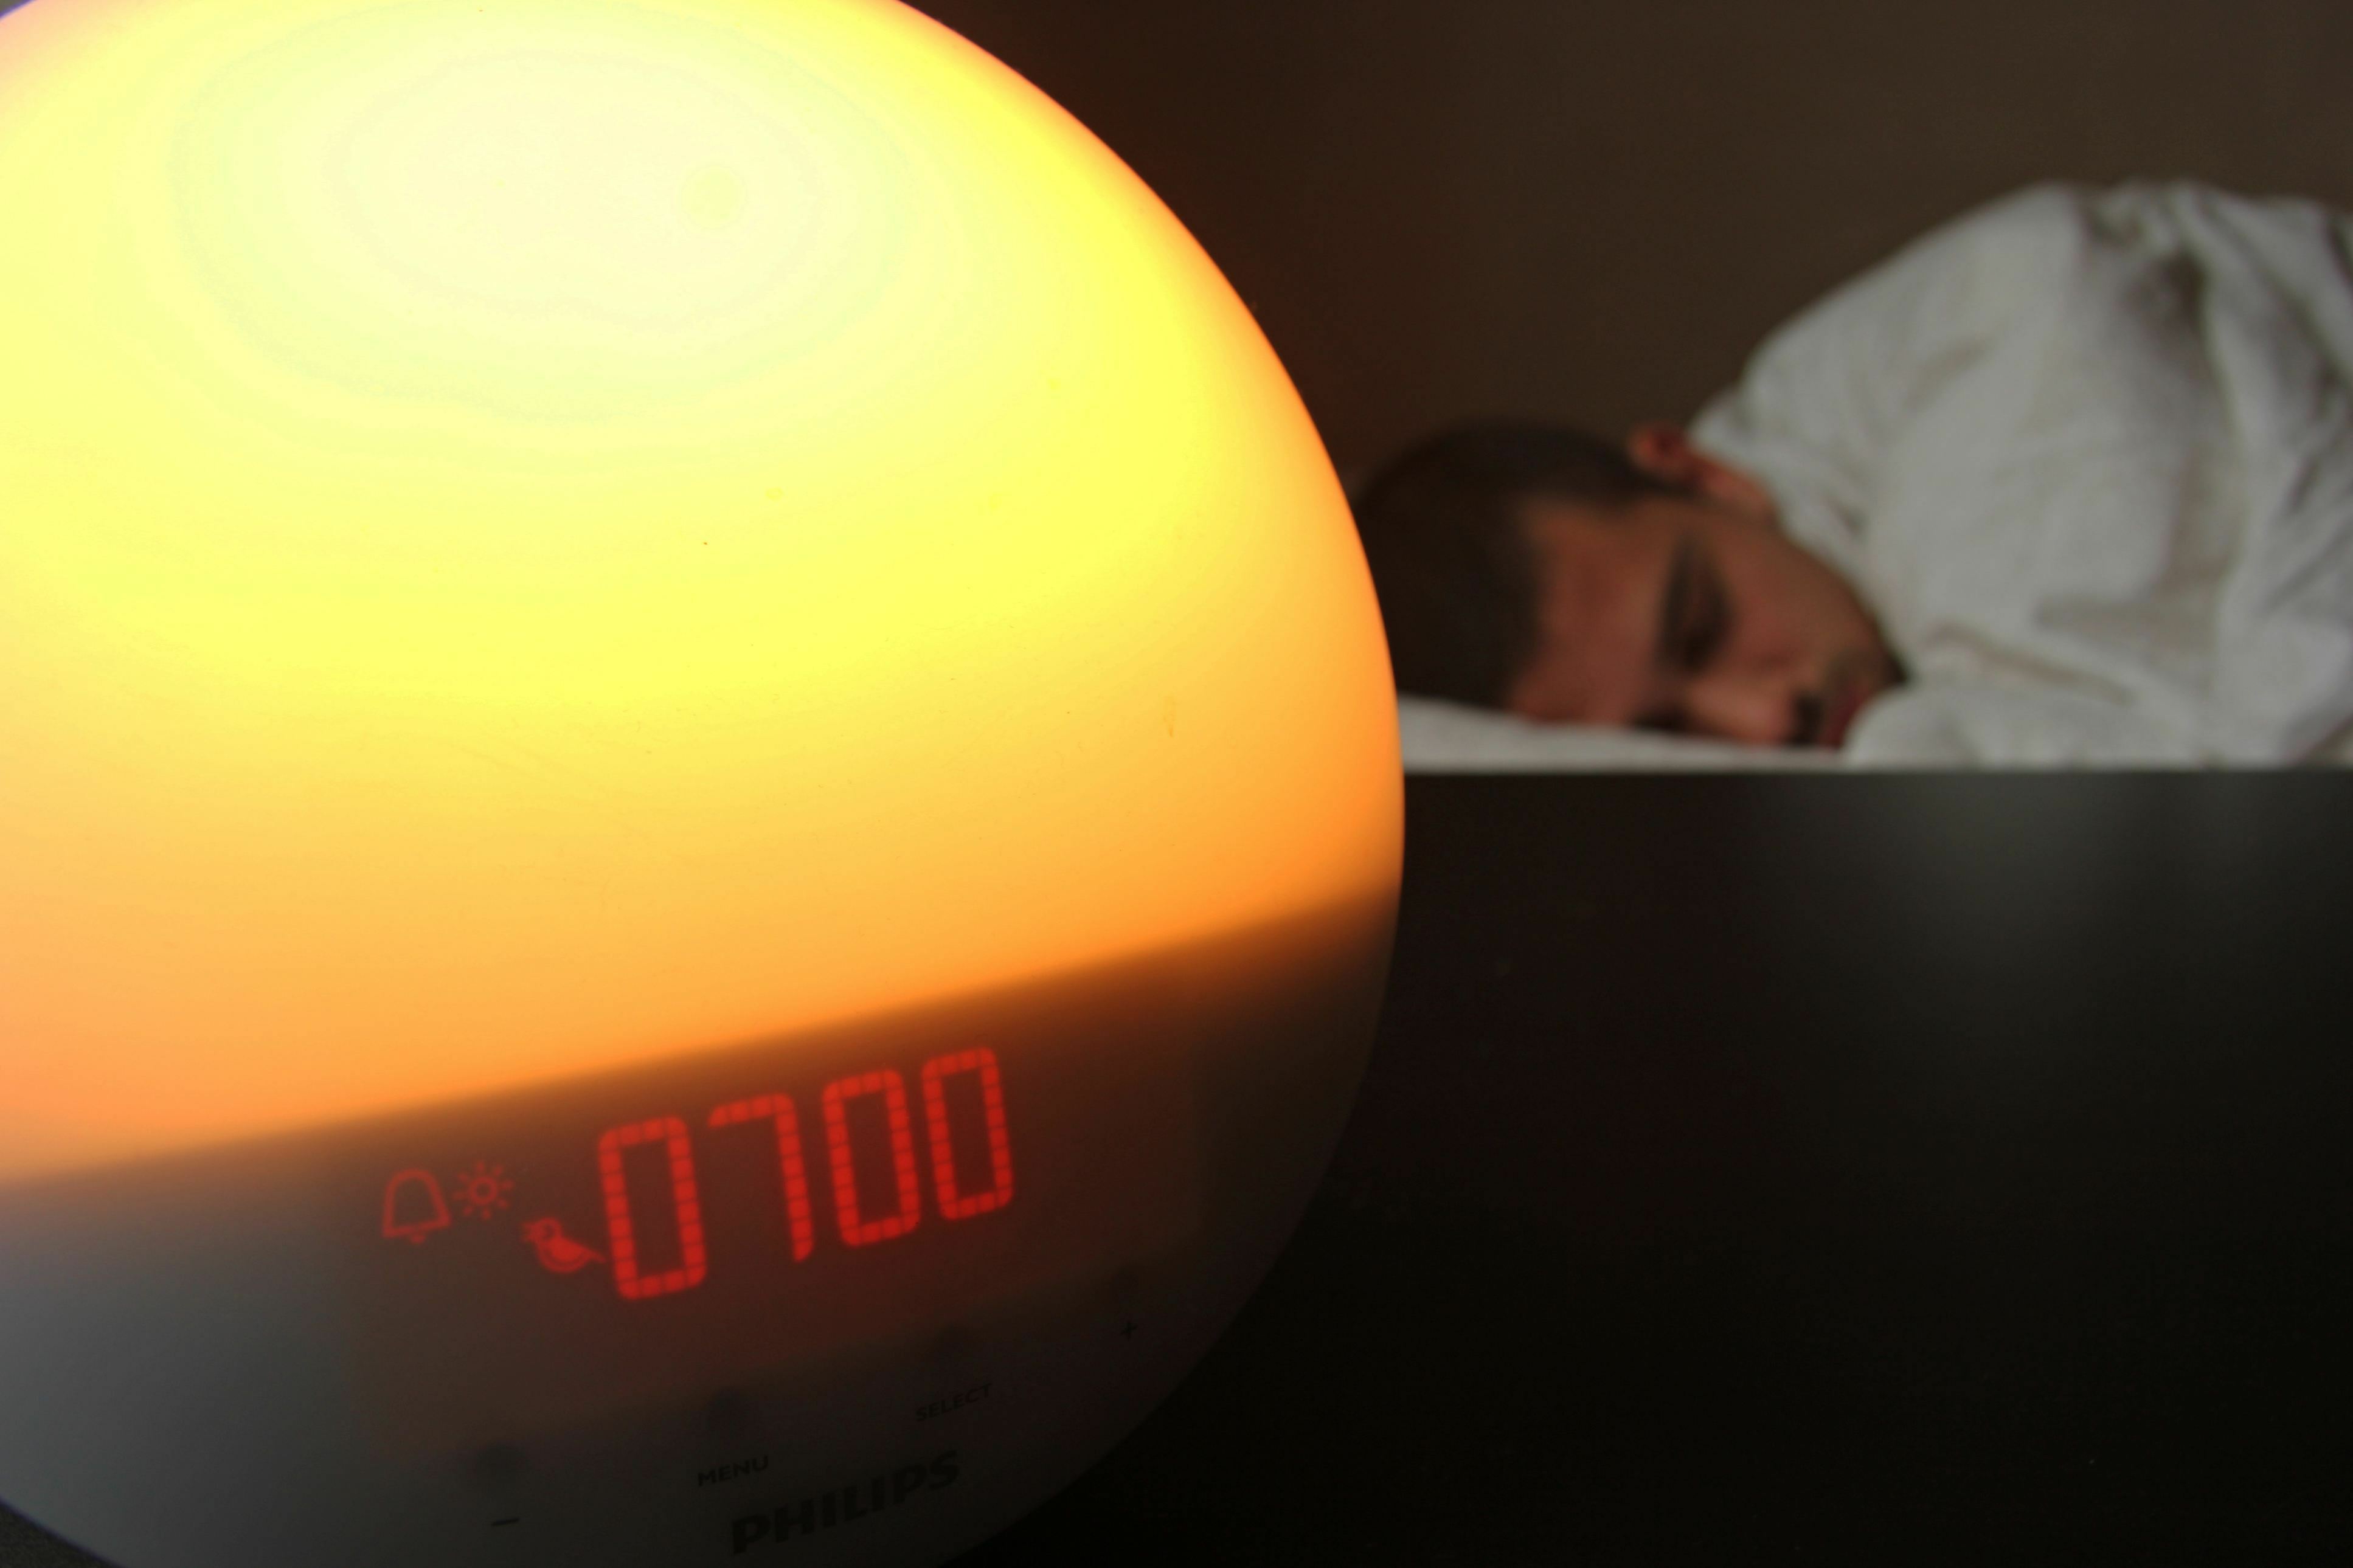 Man alsleep in bed with Alarm clock in foreground